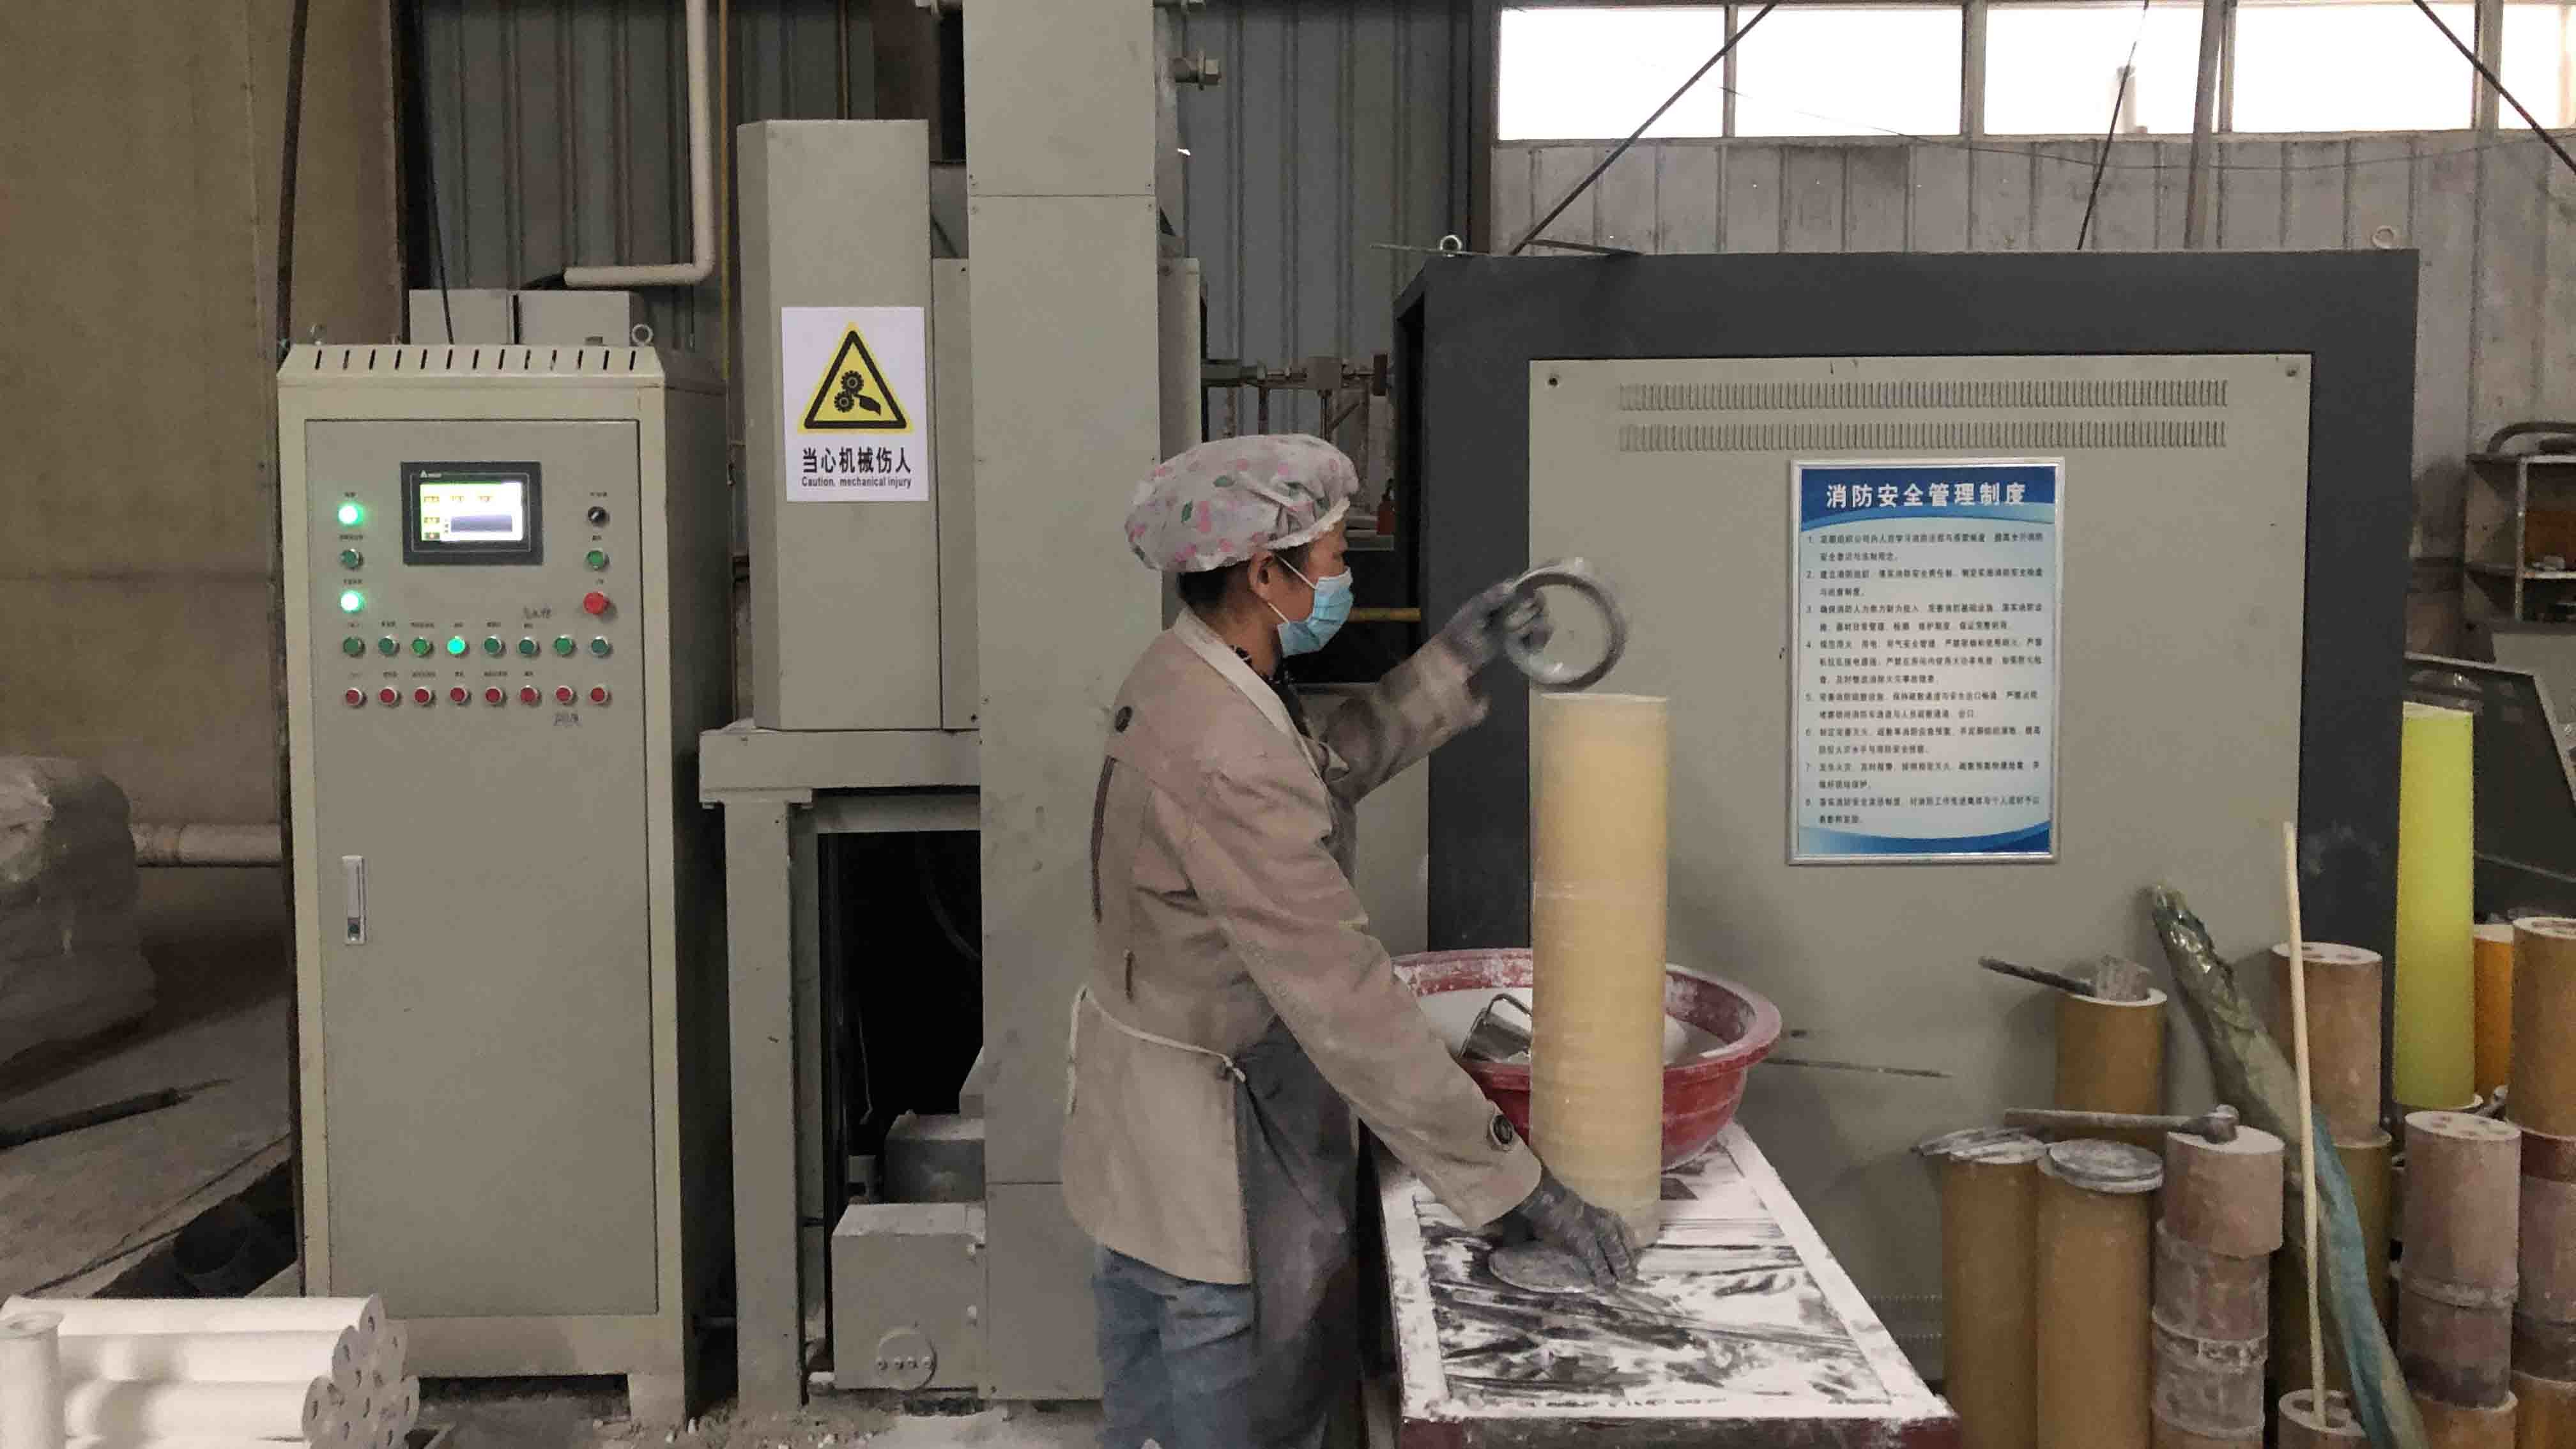 Yixing Minghao Special Ceramic Technology Co., Ltd.